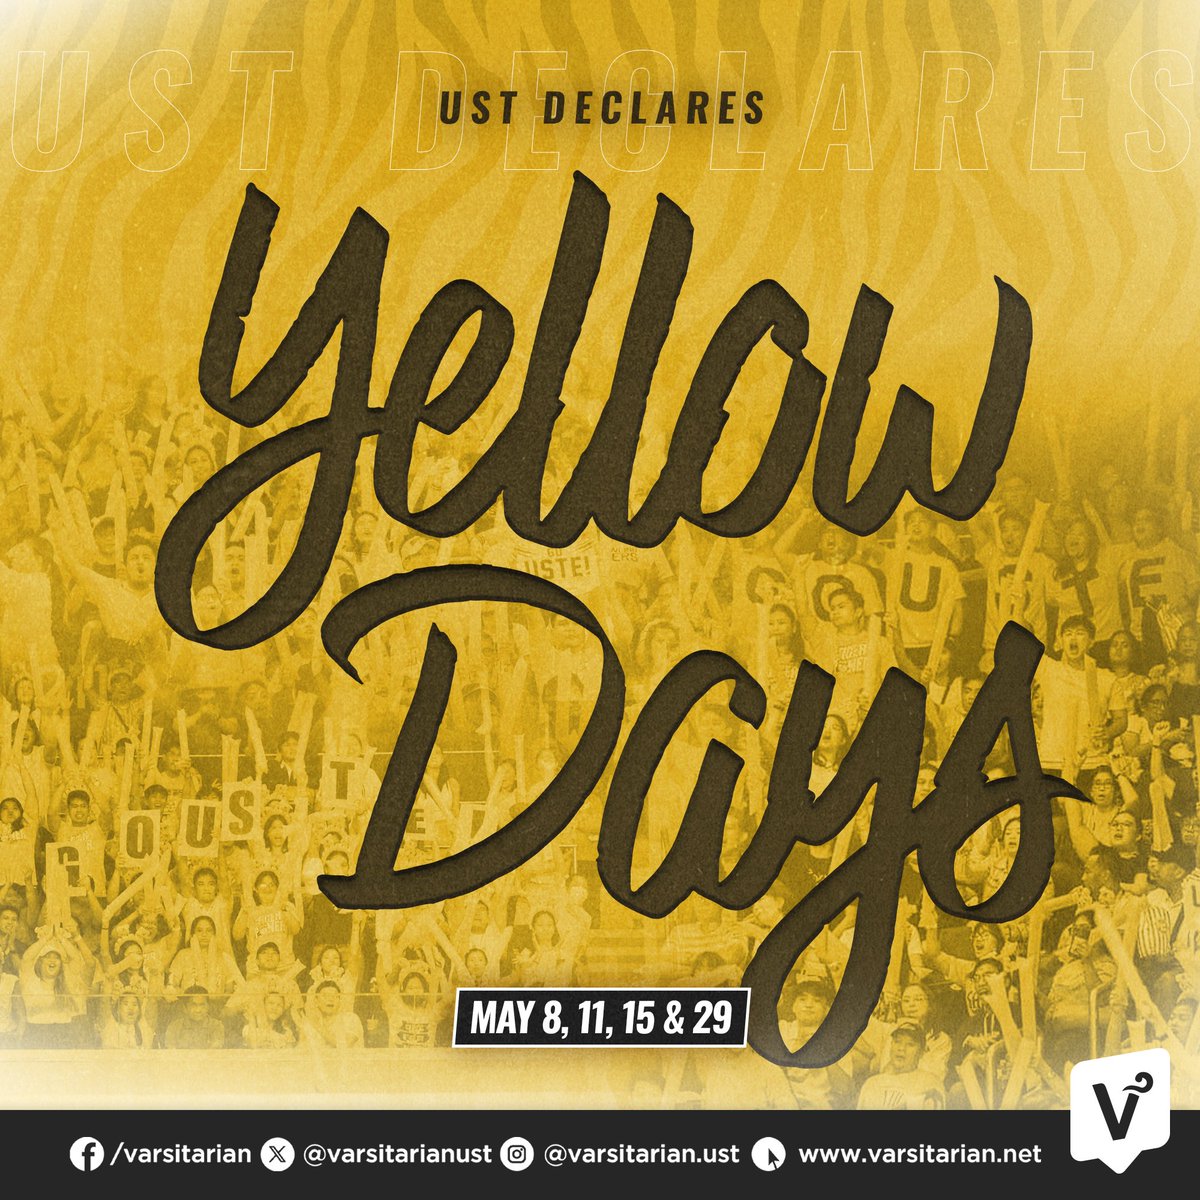 UST DECLARES YELLOW DAYS IN SUPPORT OF VOLLEYBALL, STREETDANCE TEAMS 💛

BREAKING: UST declares May 8, 11, 15, and 29 as 'Yellow Days' to show support for the UST teams competing in the Final Four of the volleyball tournaments and the upcoming streetdance competitions.

The…